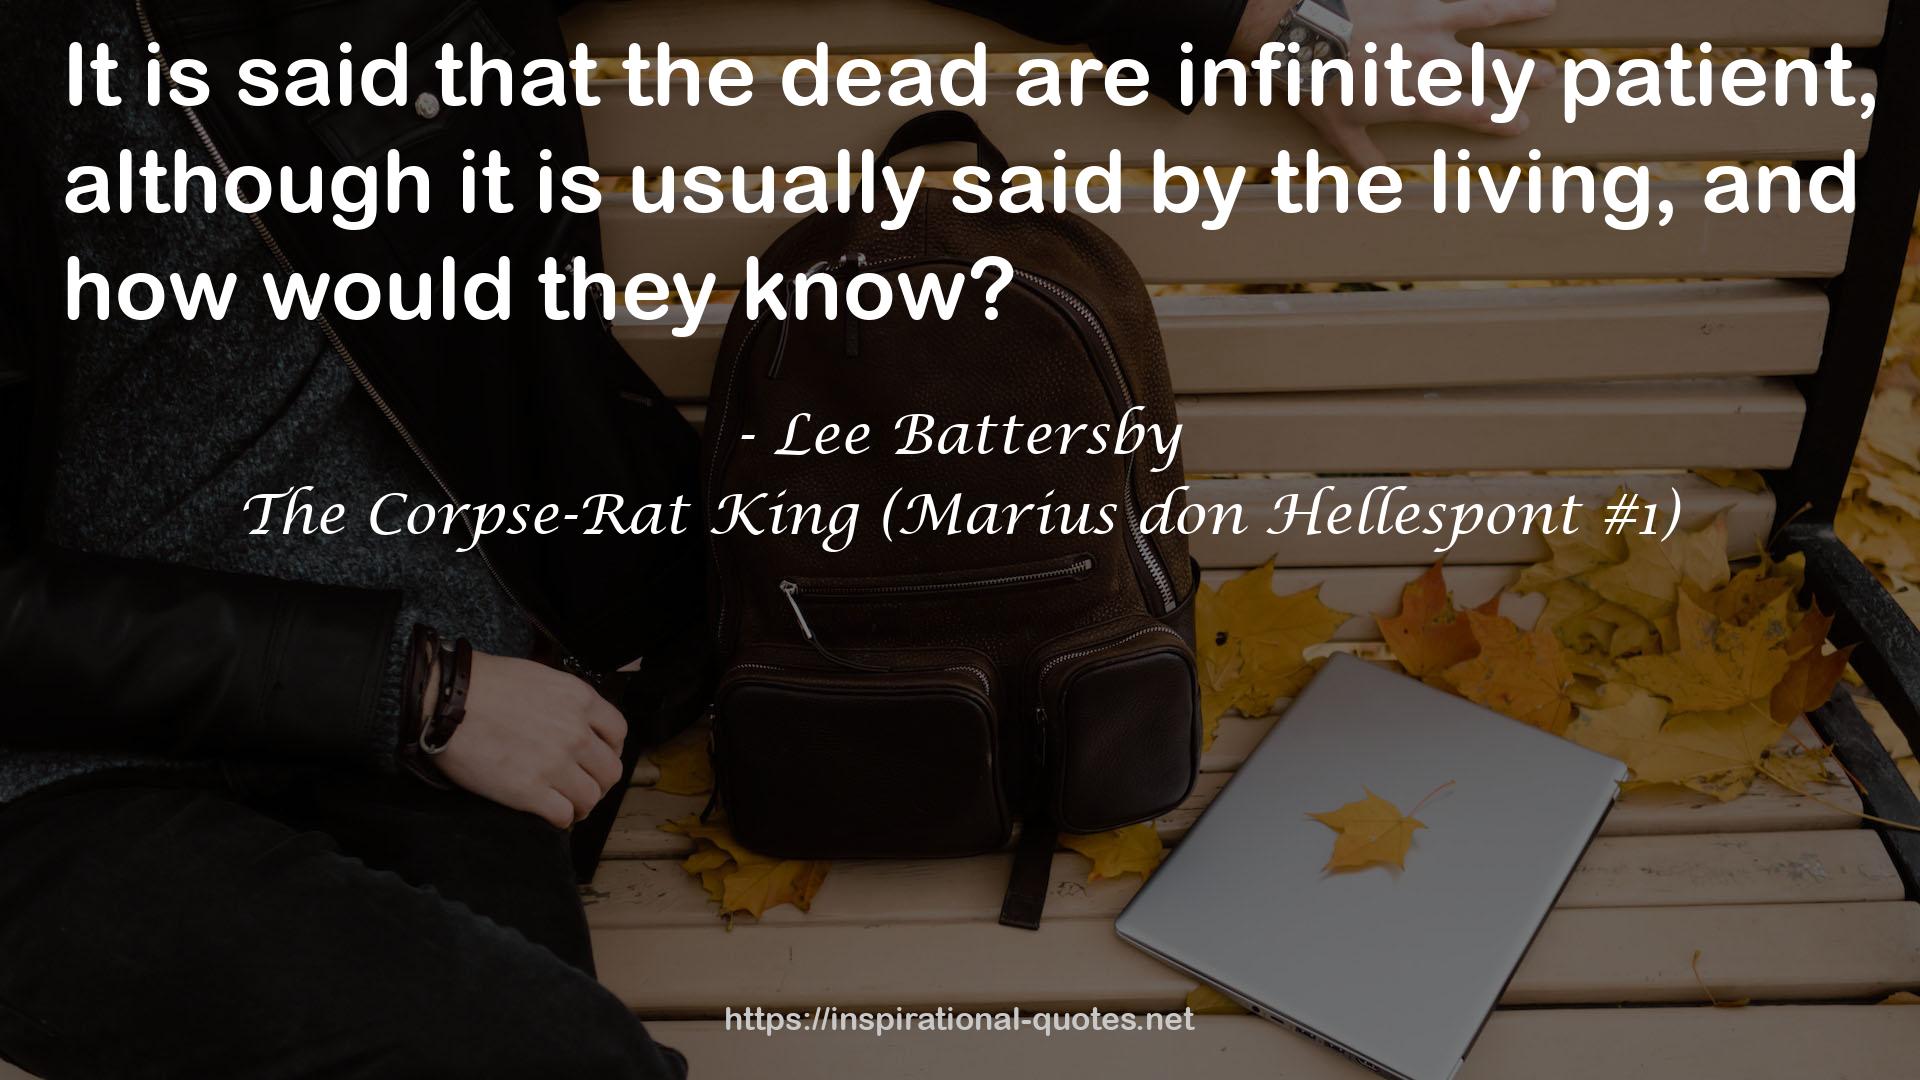 Lee Battersby QUOTES